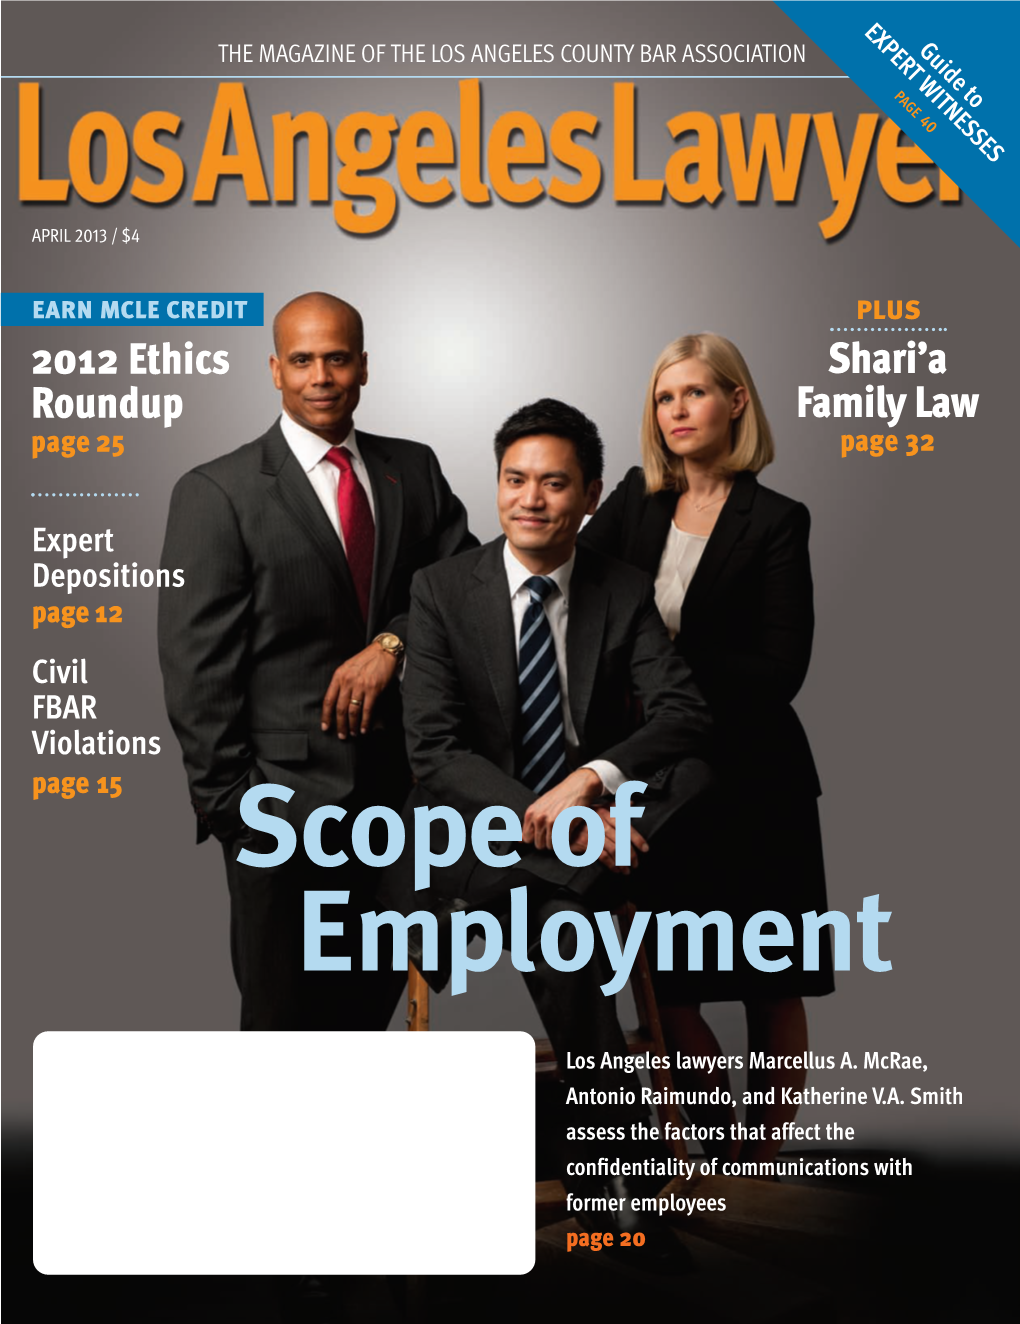 Los Angeles Lawyer April 2013 CONG RATUL ATIONS